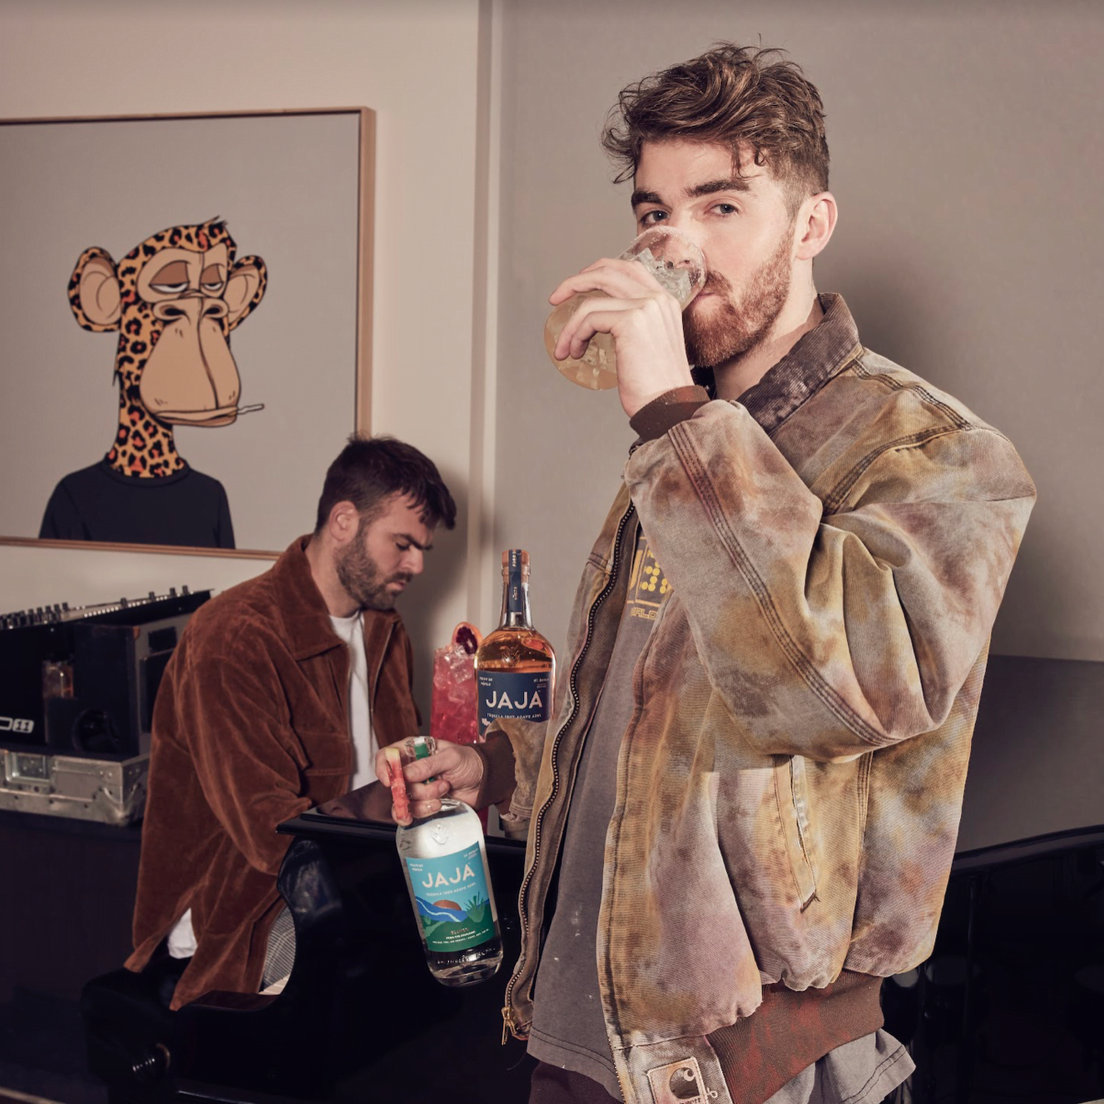 The Chainsmokers via JAJA Tequila for use by 360 Magazine